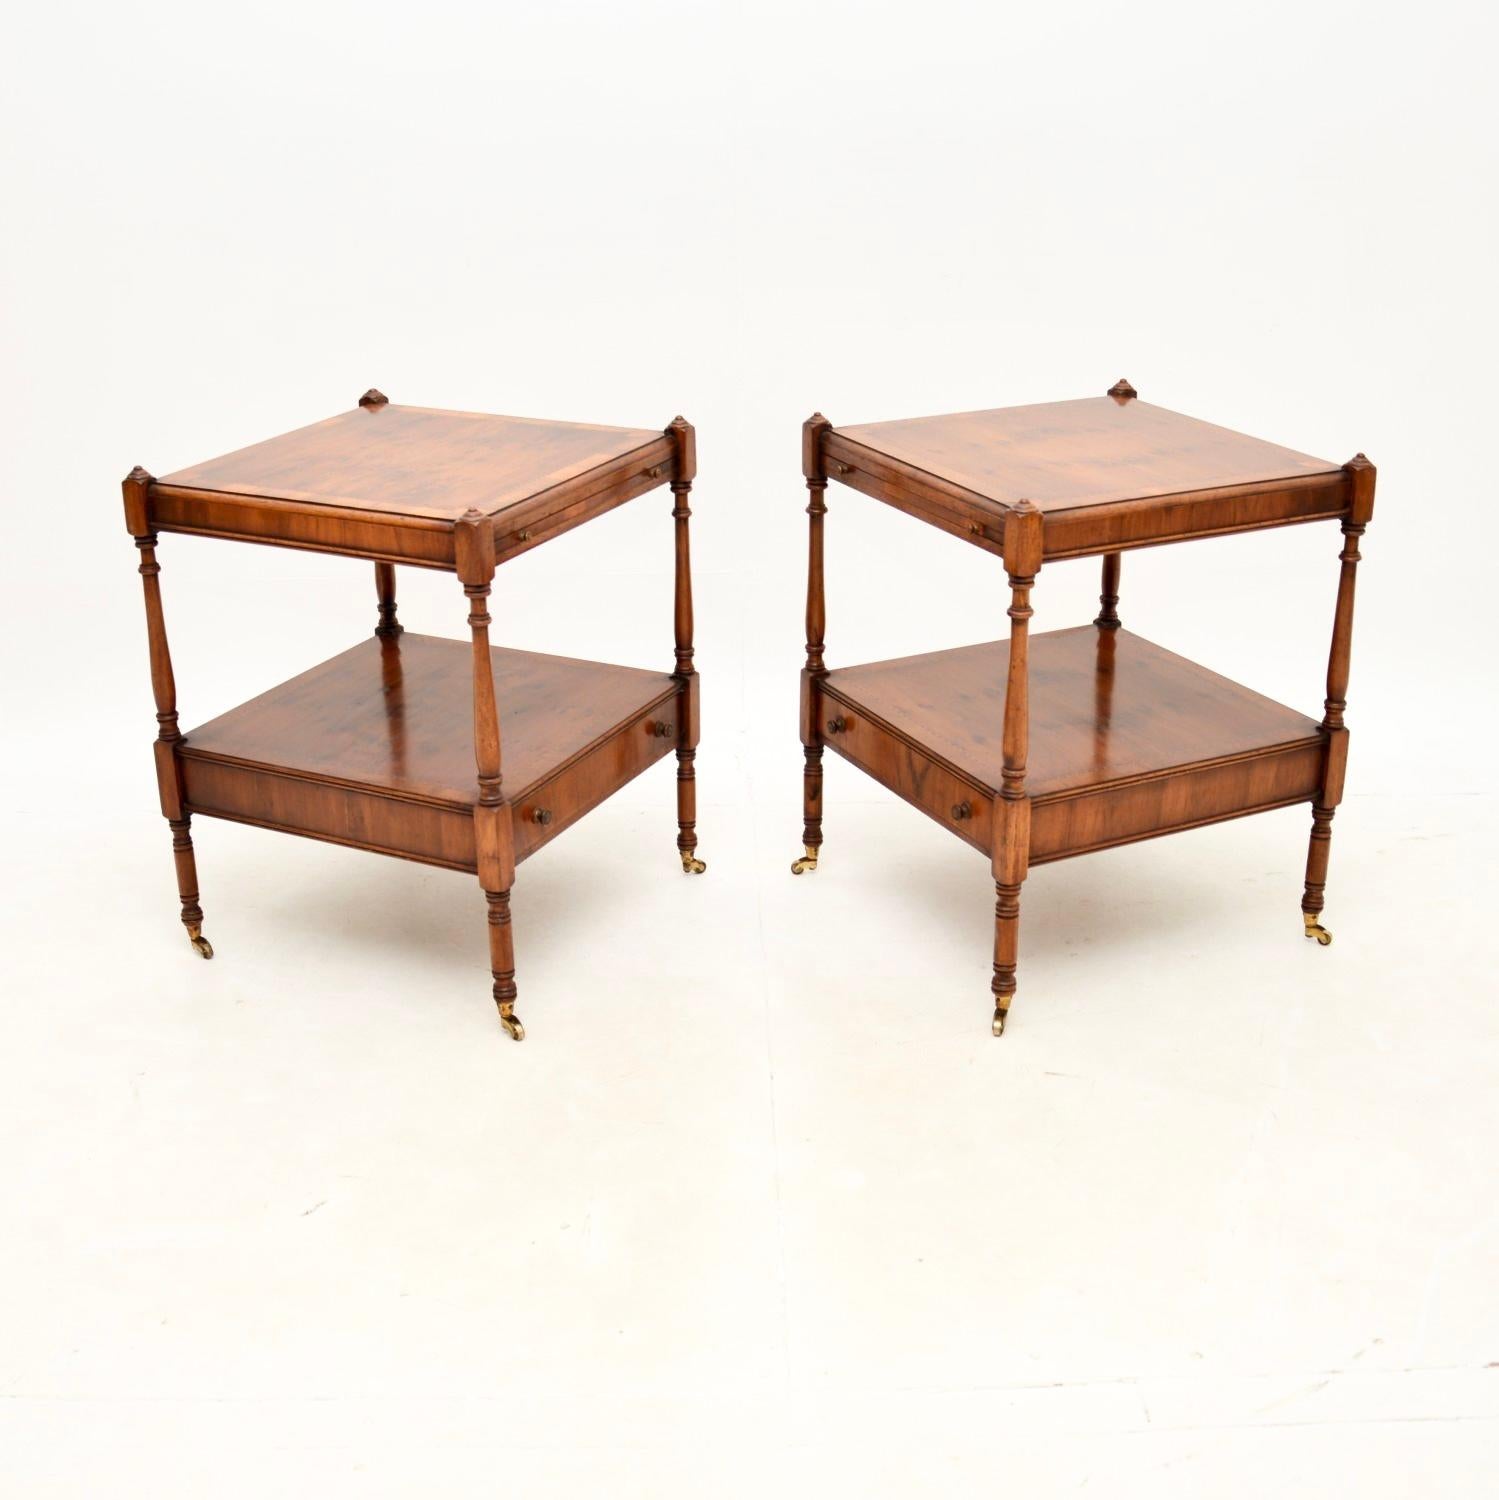 British Pair of Antique Georgian Style Yew Wood Side Tables